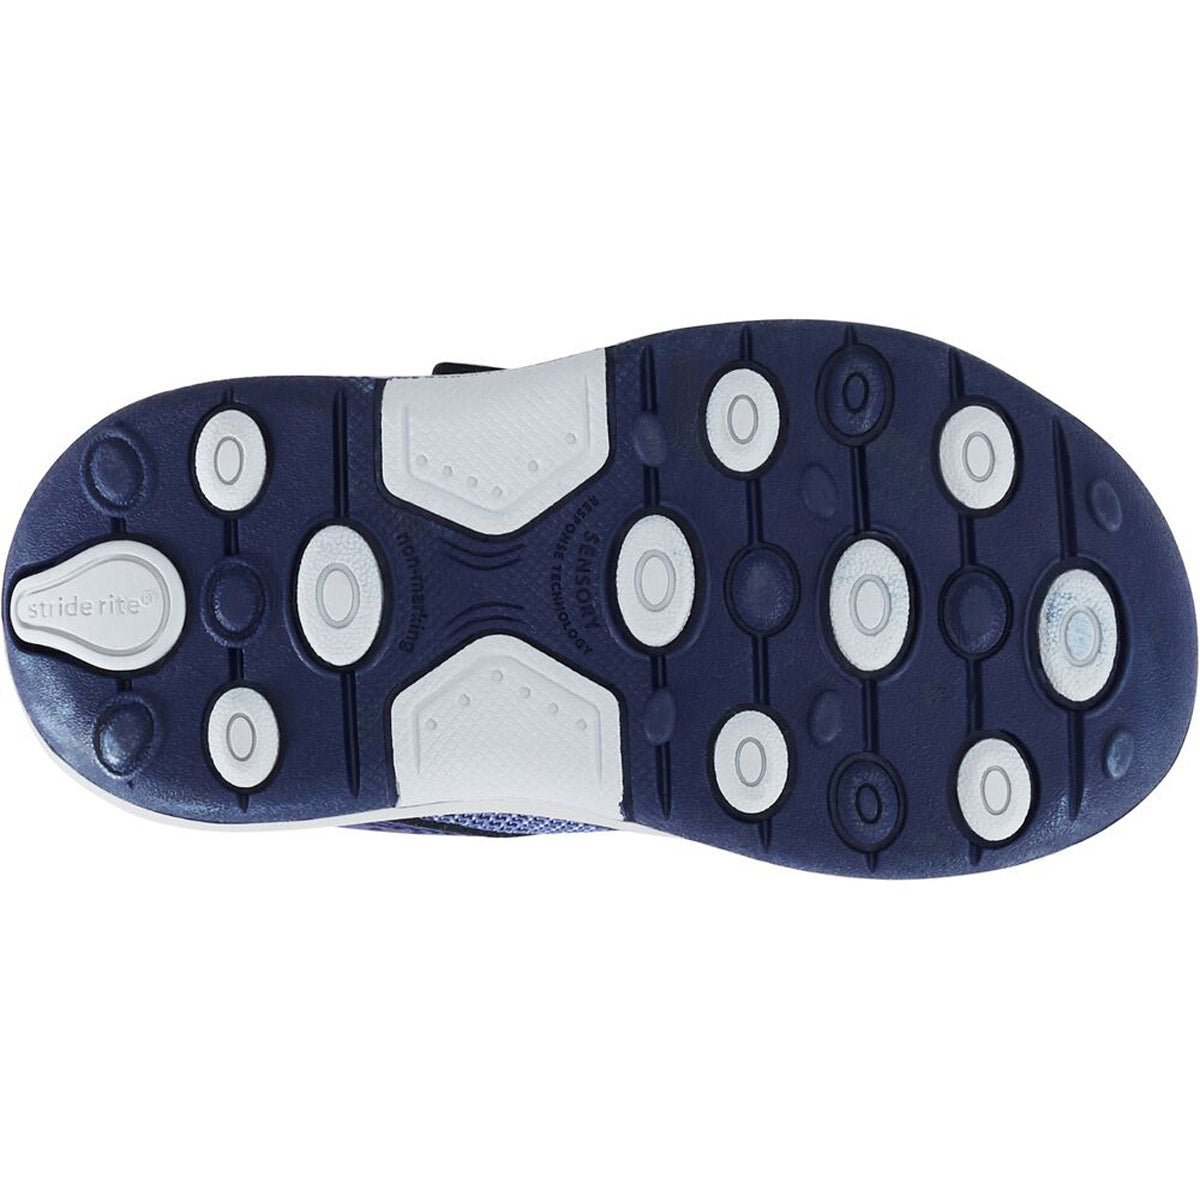 A close-up of the sole of a Stride Rite Winslow Navy Sneaker with blue rubber and white traction pads featuring ground-detecting technology.